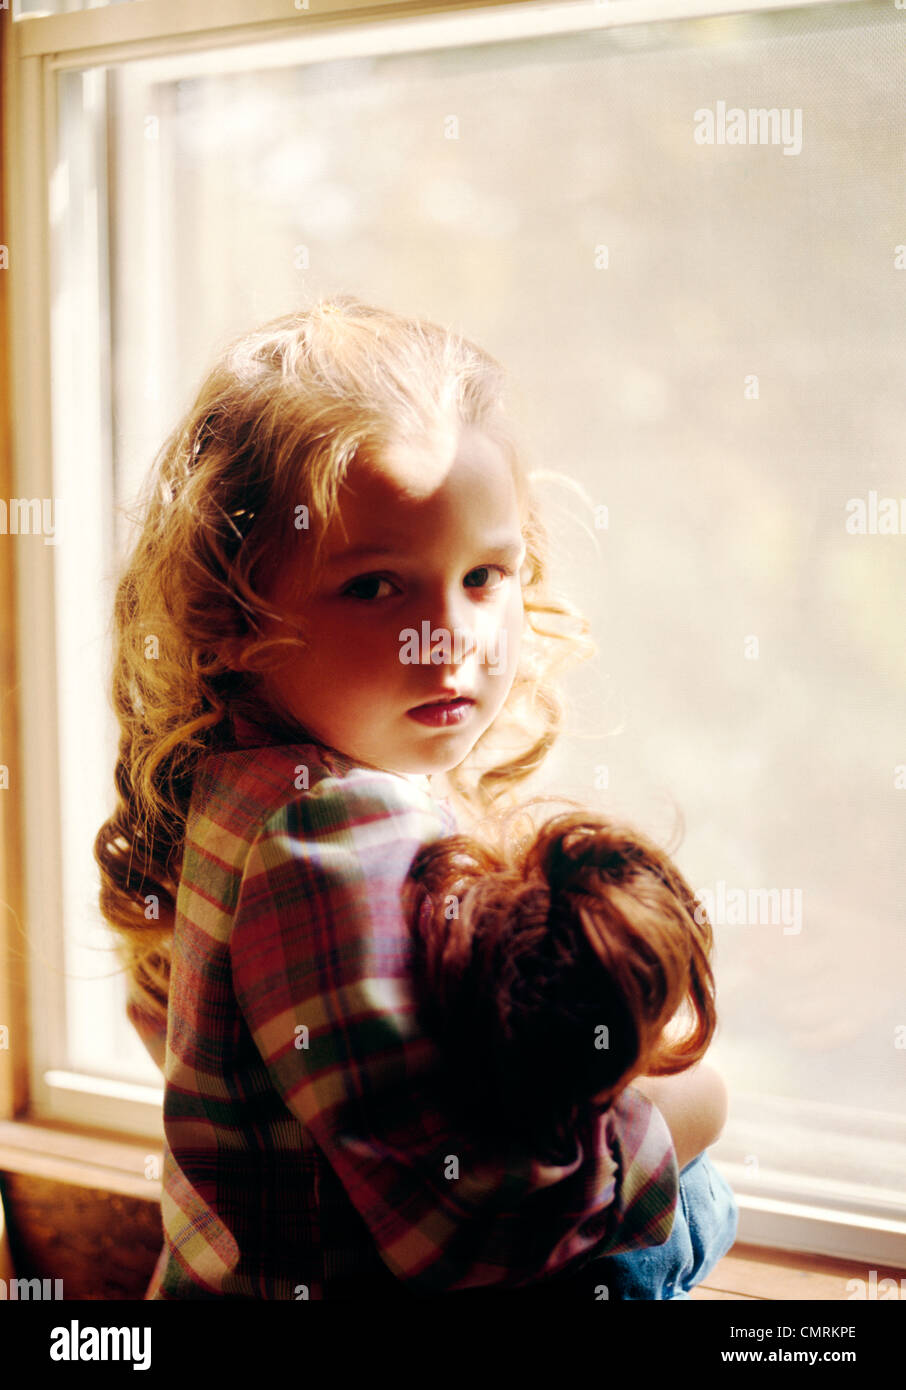 1970 1970s RETRO BLONDE GIRL HOLDING DOLL STANDING BY WINDOW SAD LONELY MELANCHOLY Stock Photo